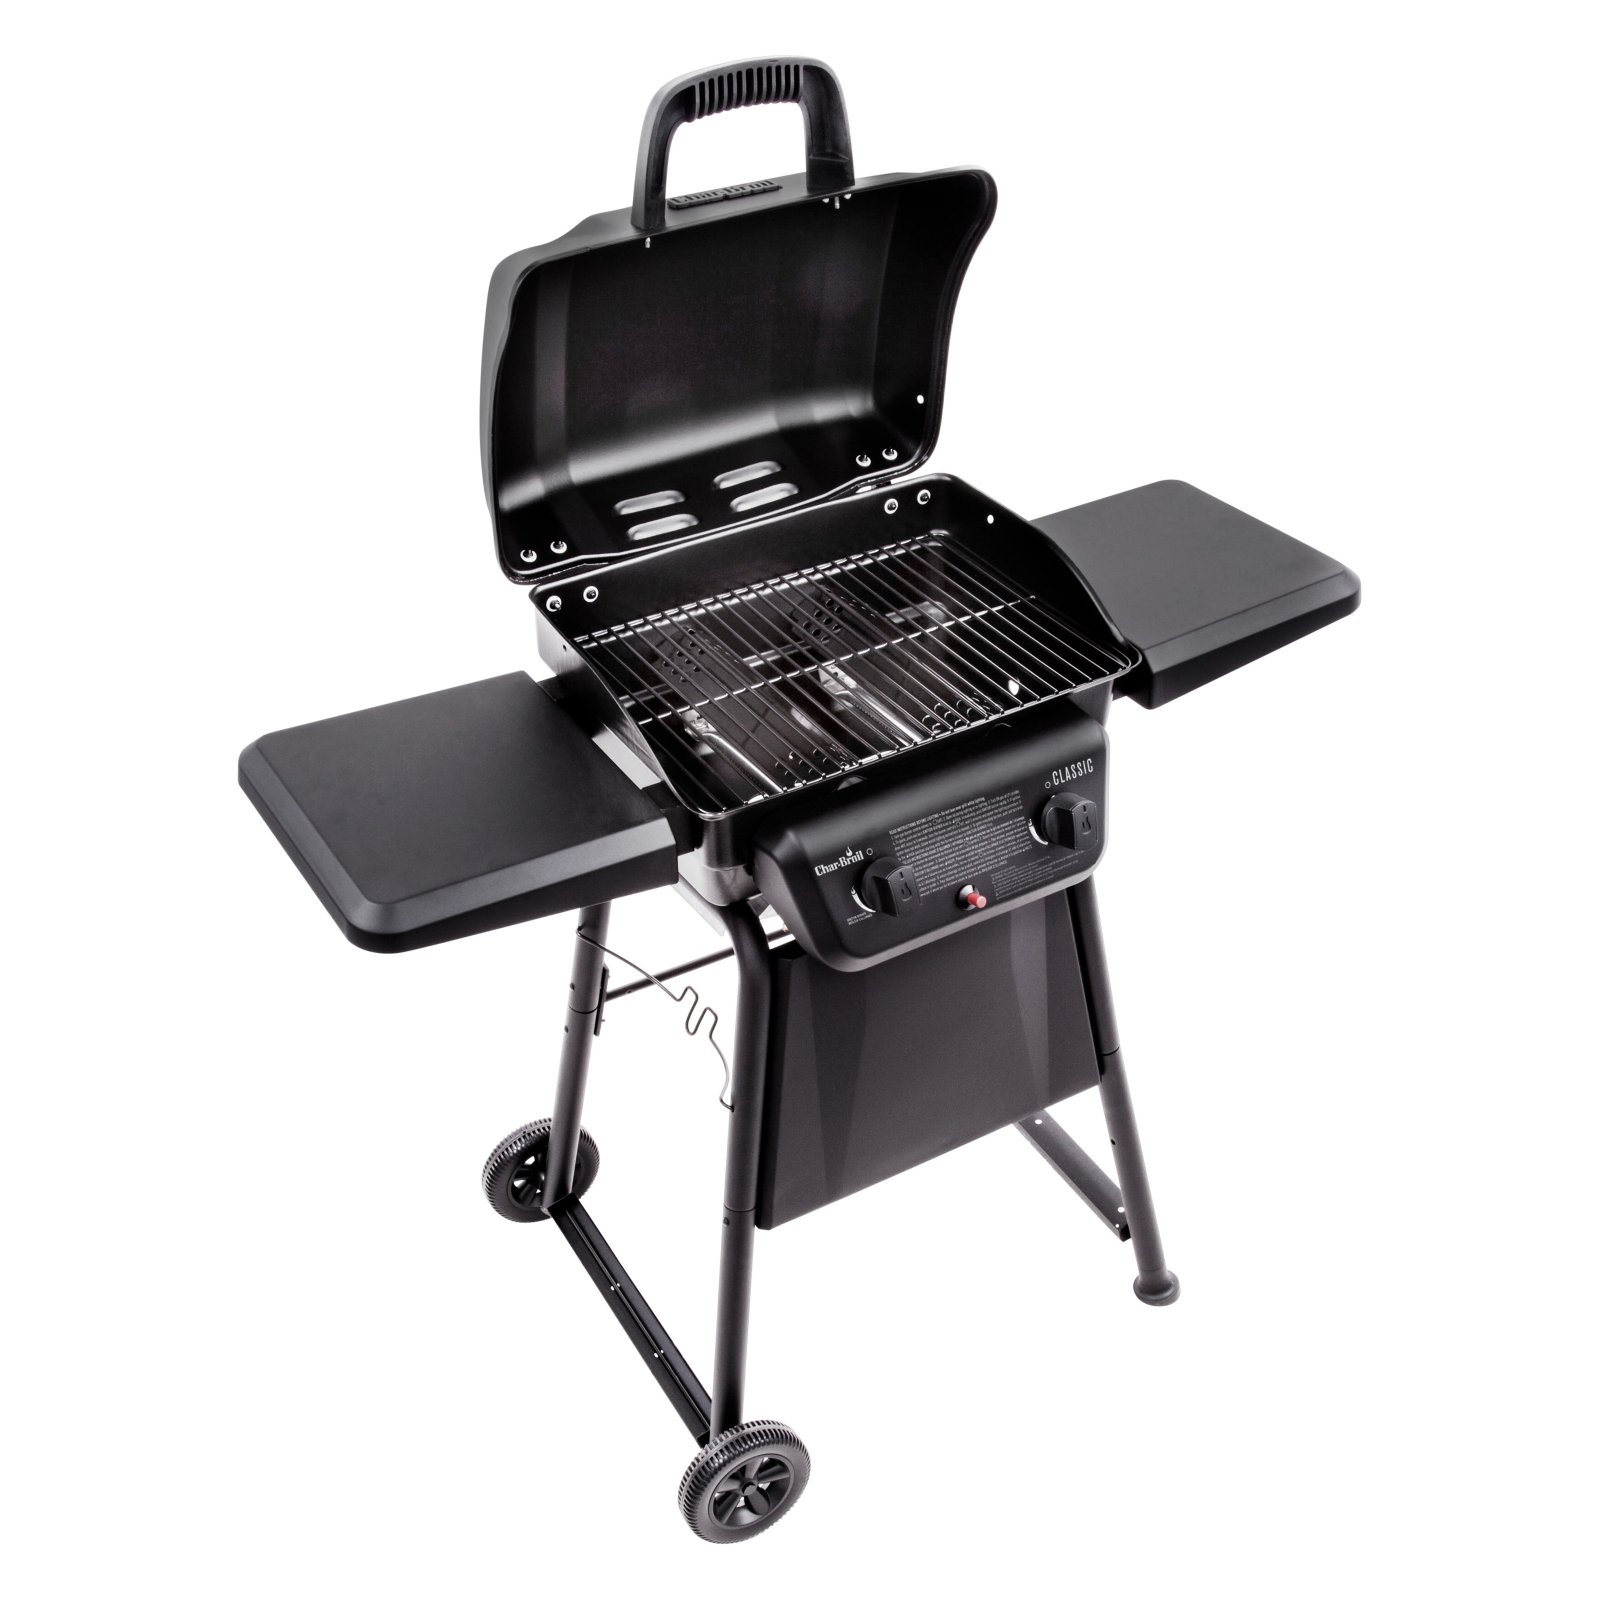 Char-Broil 463672717 Gas Grill Stainless Steel - image 5 of 10